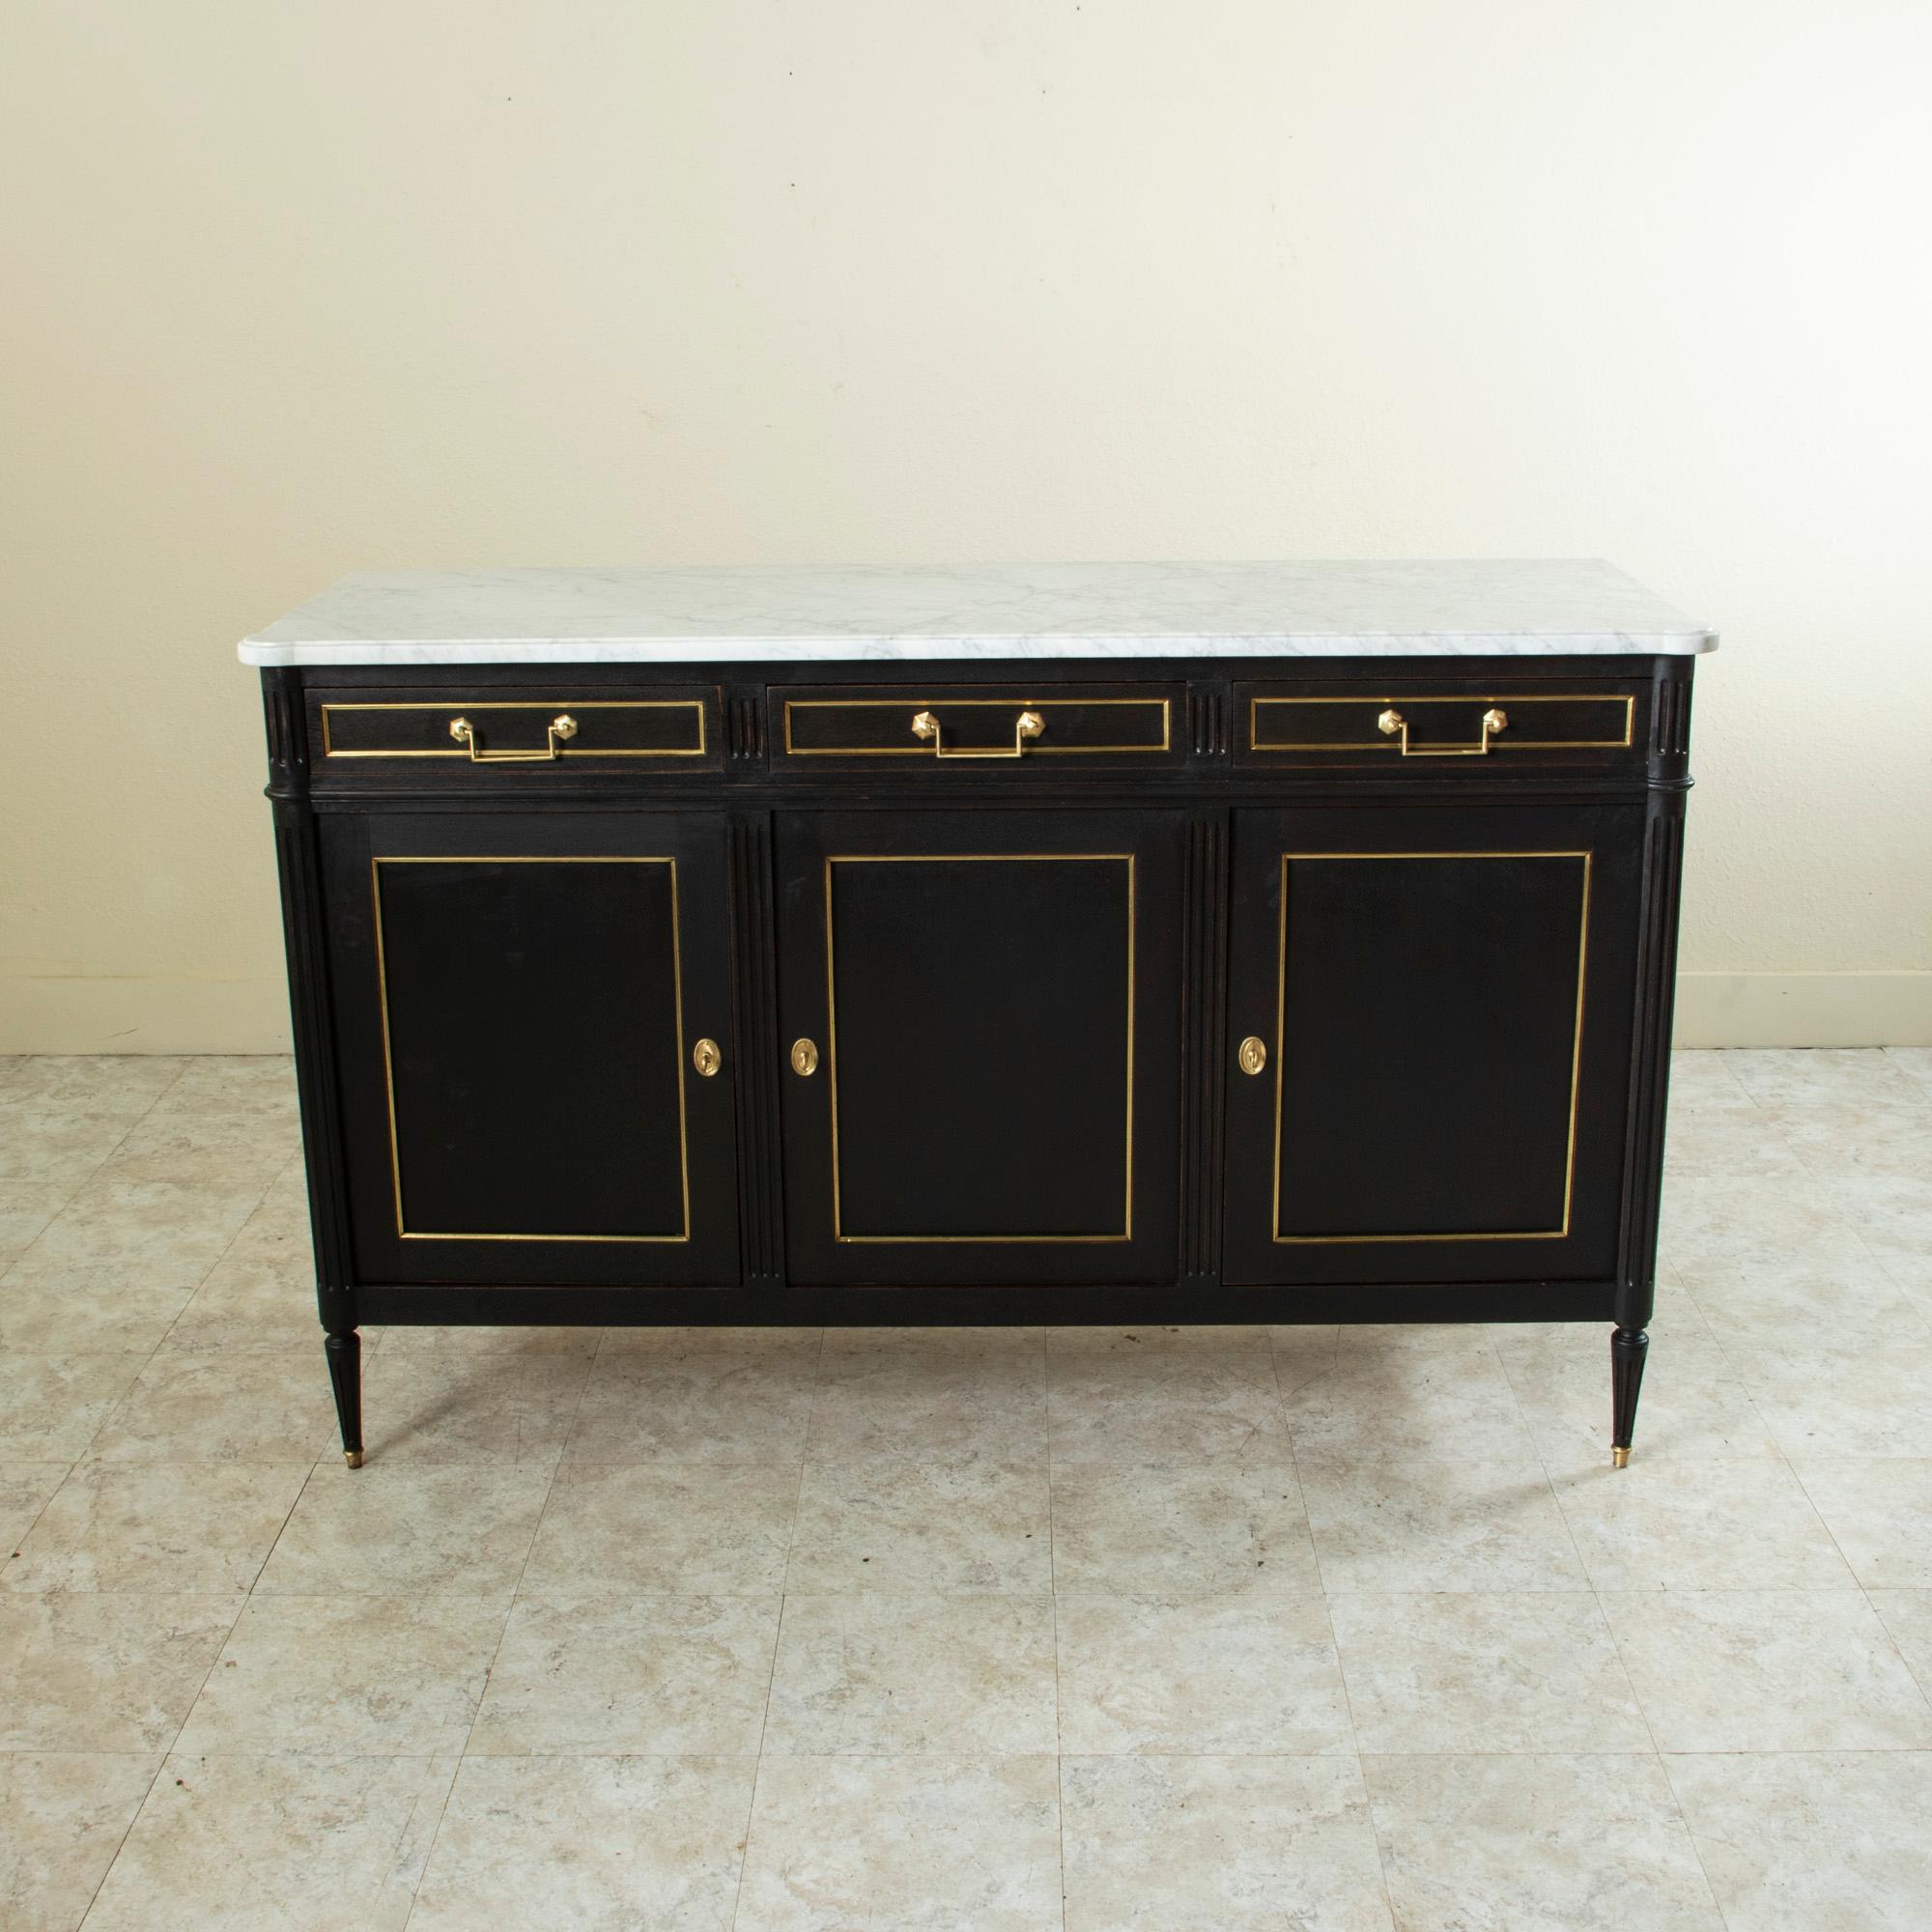 This French Louis XVI style enfilade or sideboard from the mid-20th century features a black painted mahogany cabinet with a white marble top. Stunning bronze banding outlines each door and drawer, while fluted columns define the facade. Its